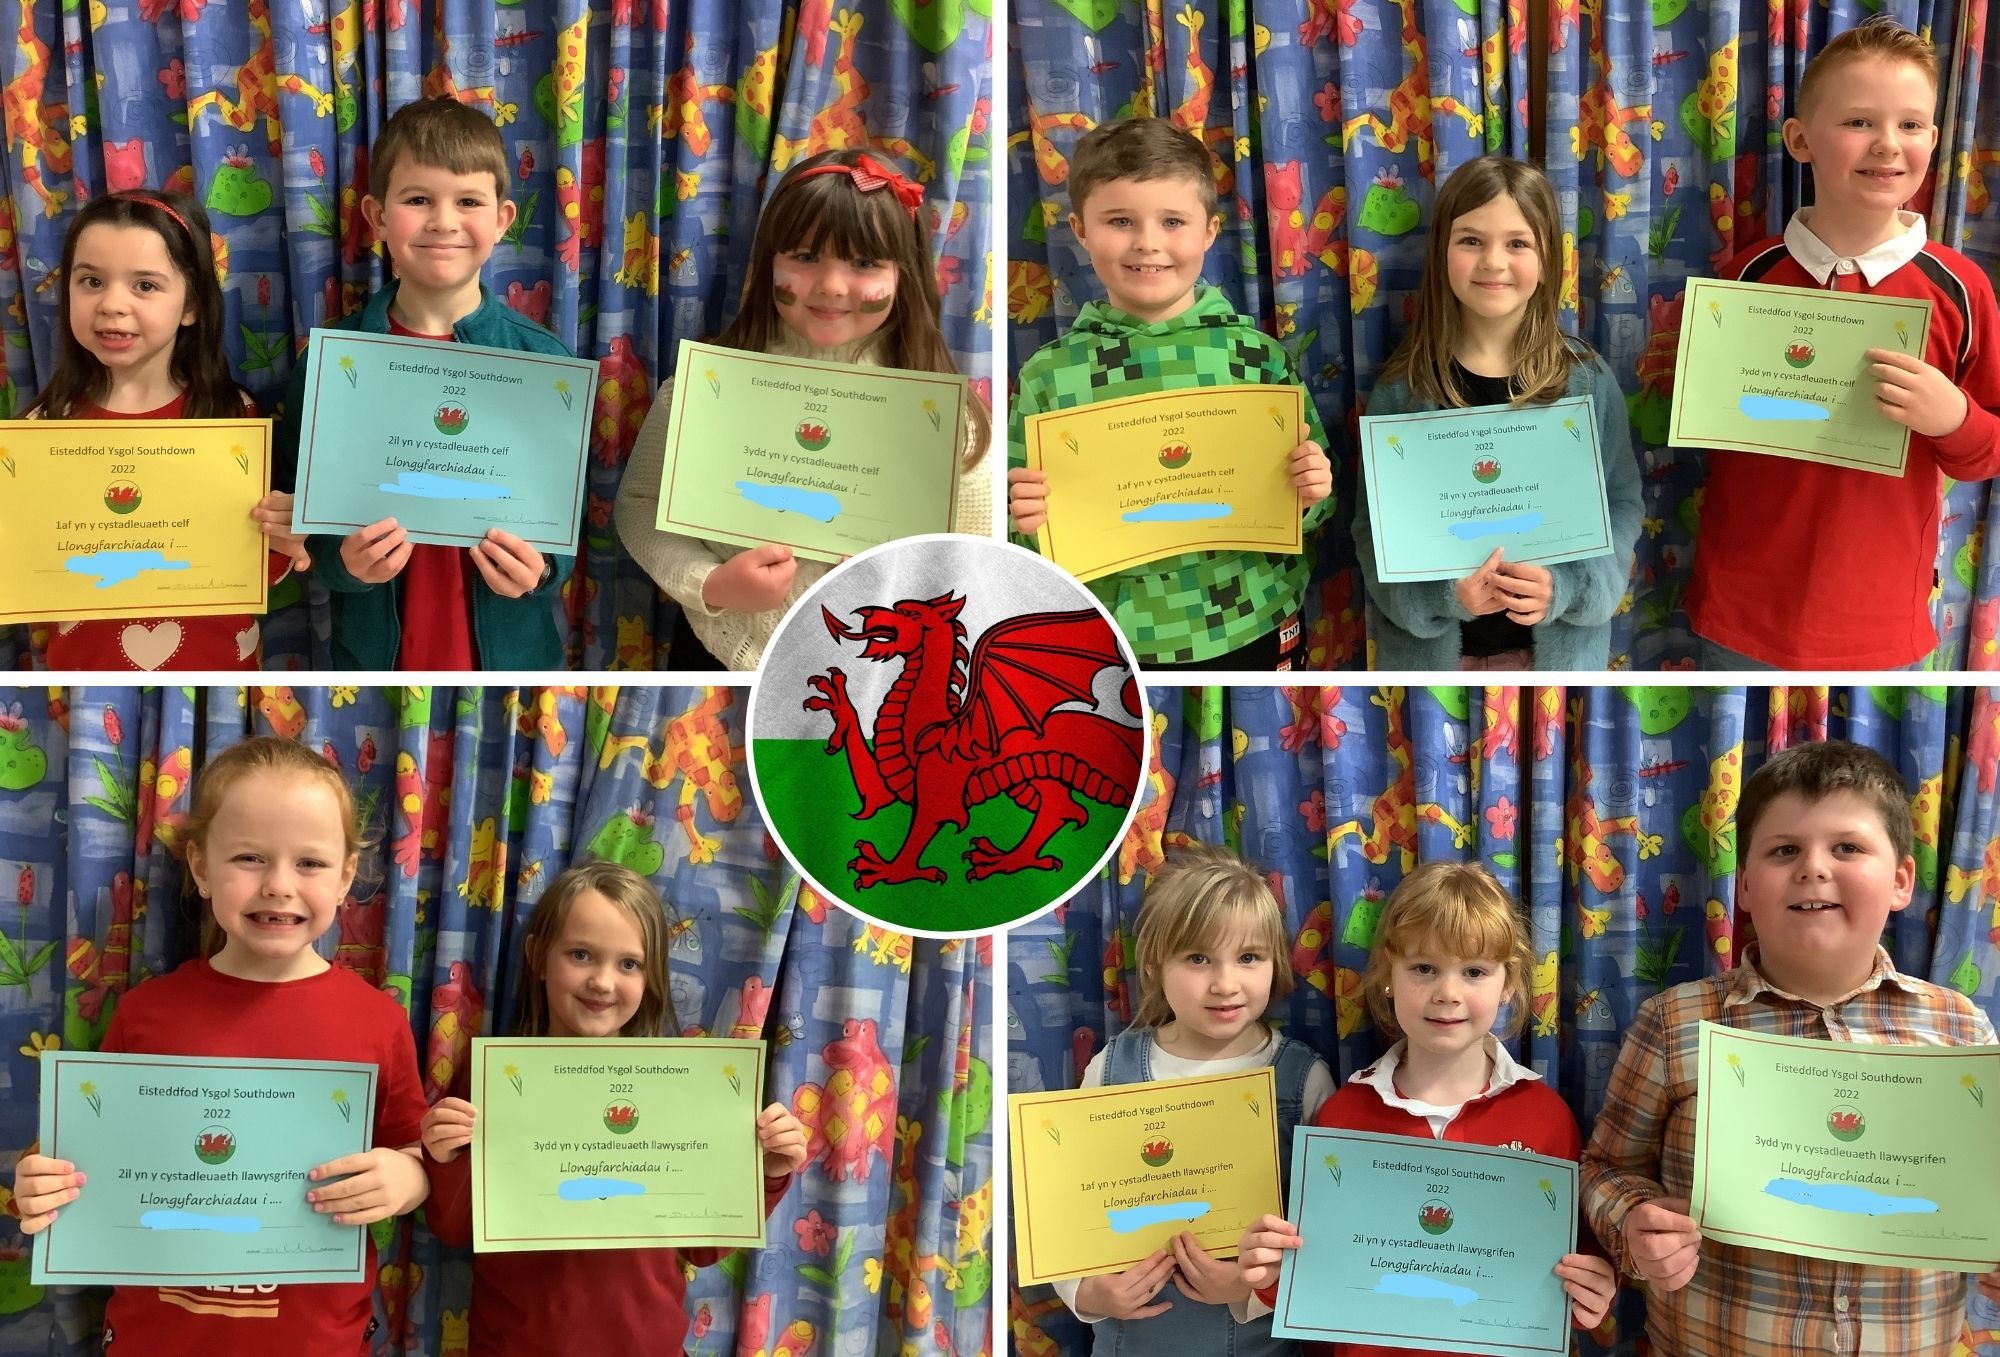 Some of those who took part in the Eisteddfod at Southdown Primary School.